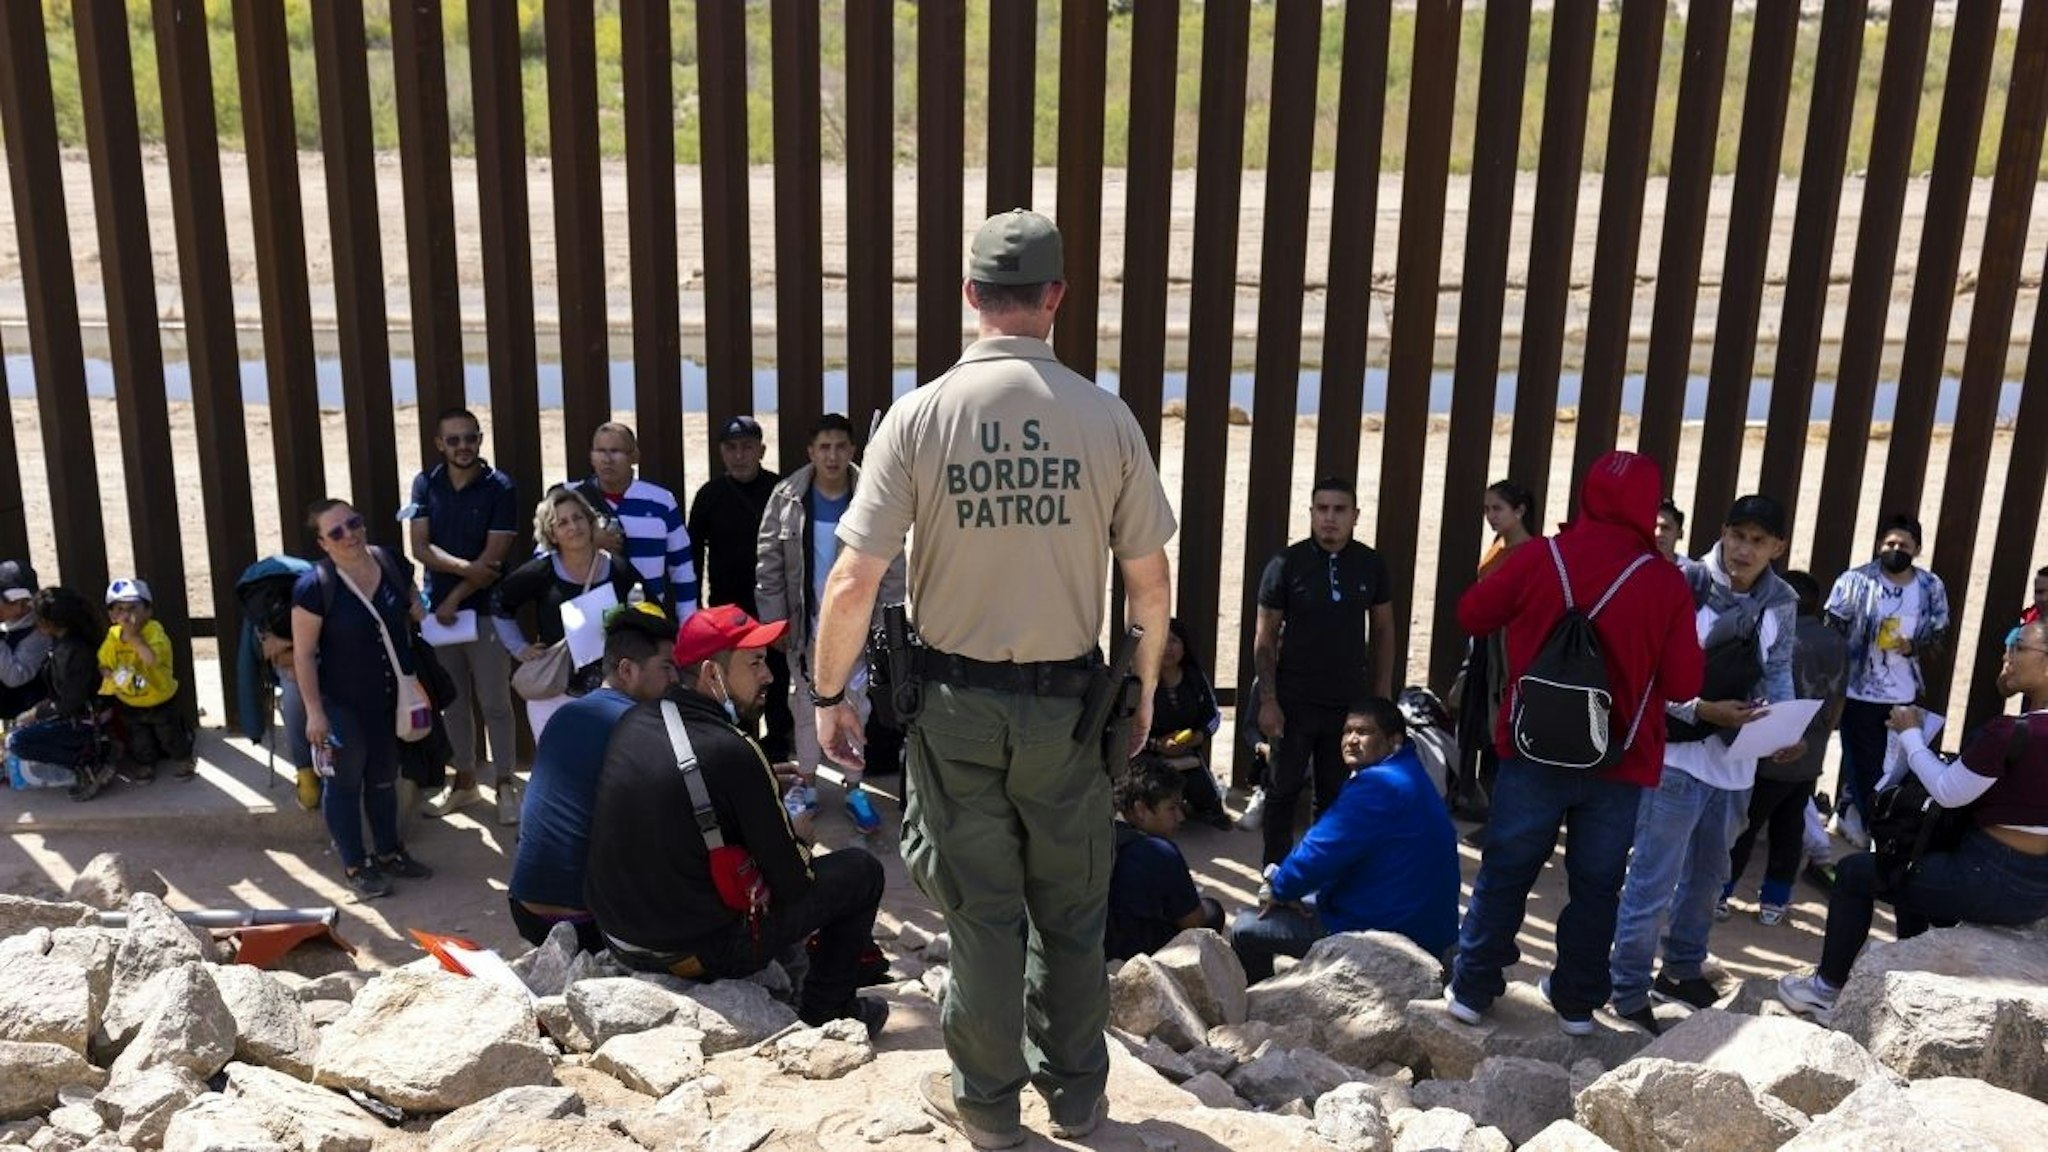 A U.S. Border Patrol agents speaks with migrants seeking asylum after crossing the Mexico and U.S. border in Yuma, Arizona, U.S. on Tuesday, May 3, 2022.